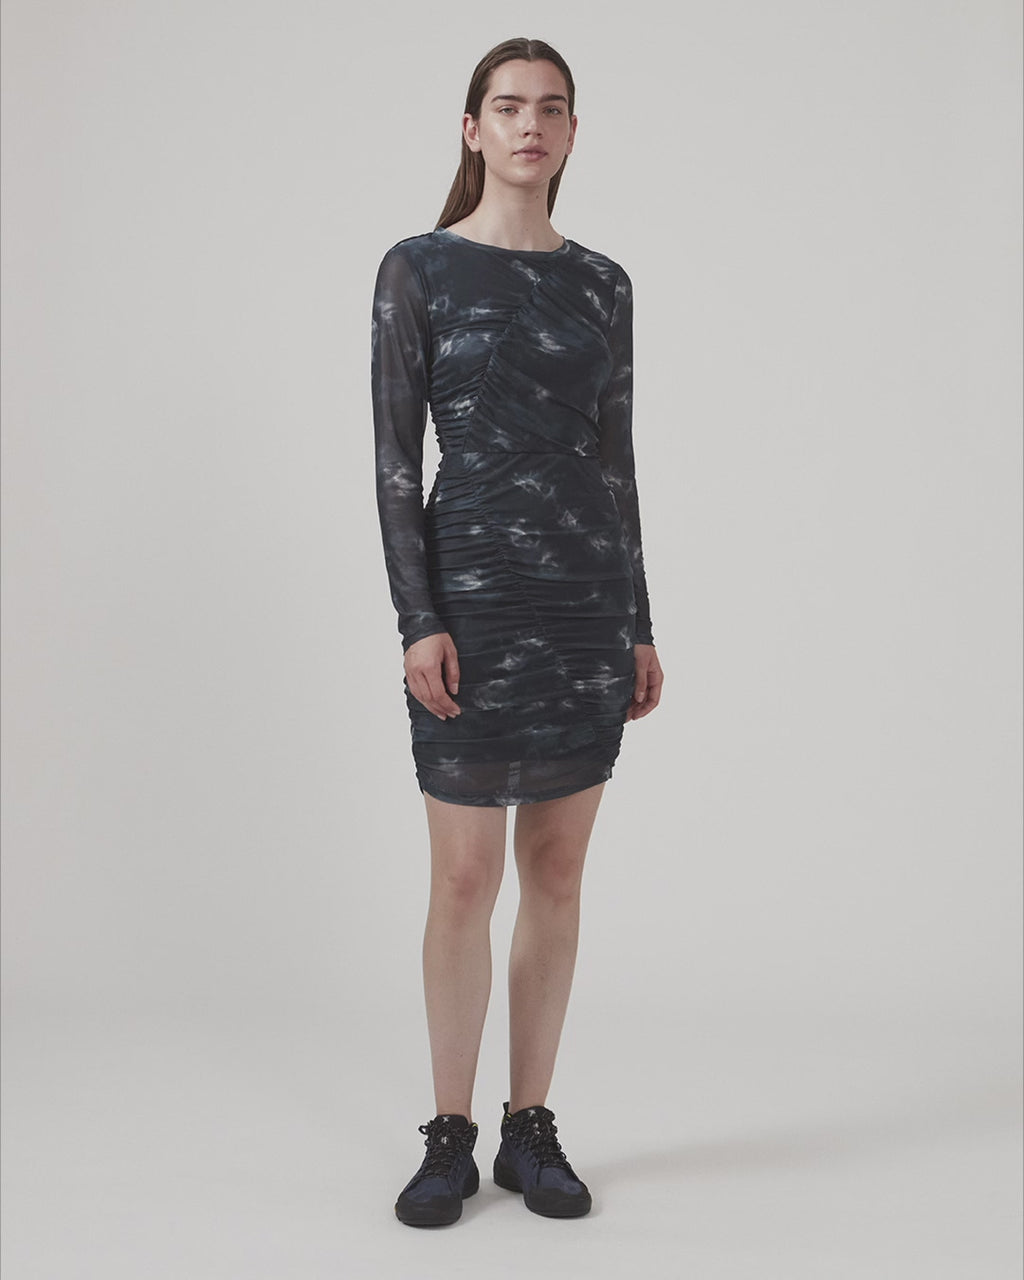 Short dress with draped details and multiple layers. CliffordMD print dress has a round neck and long sleeves in mesh.  The model is 177 cm and wears a size S/36.